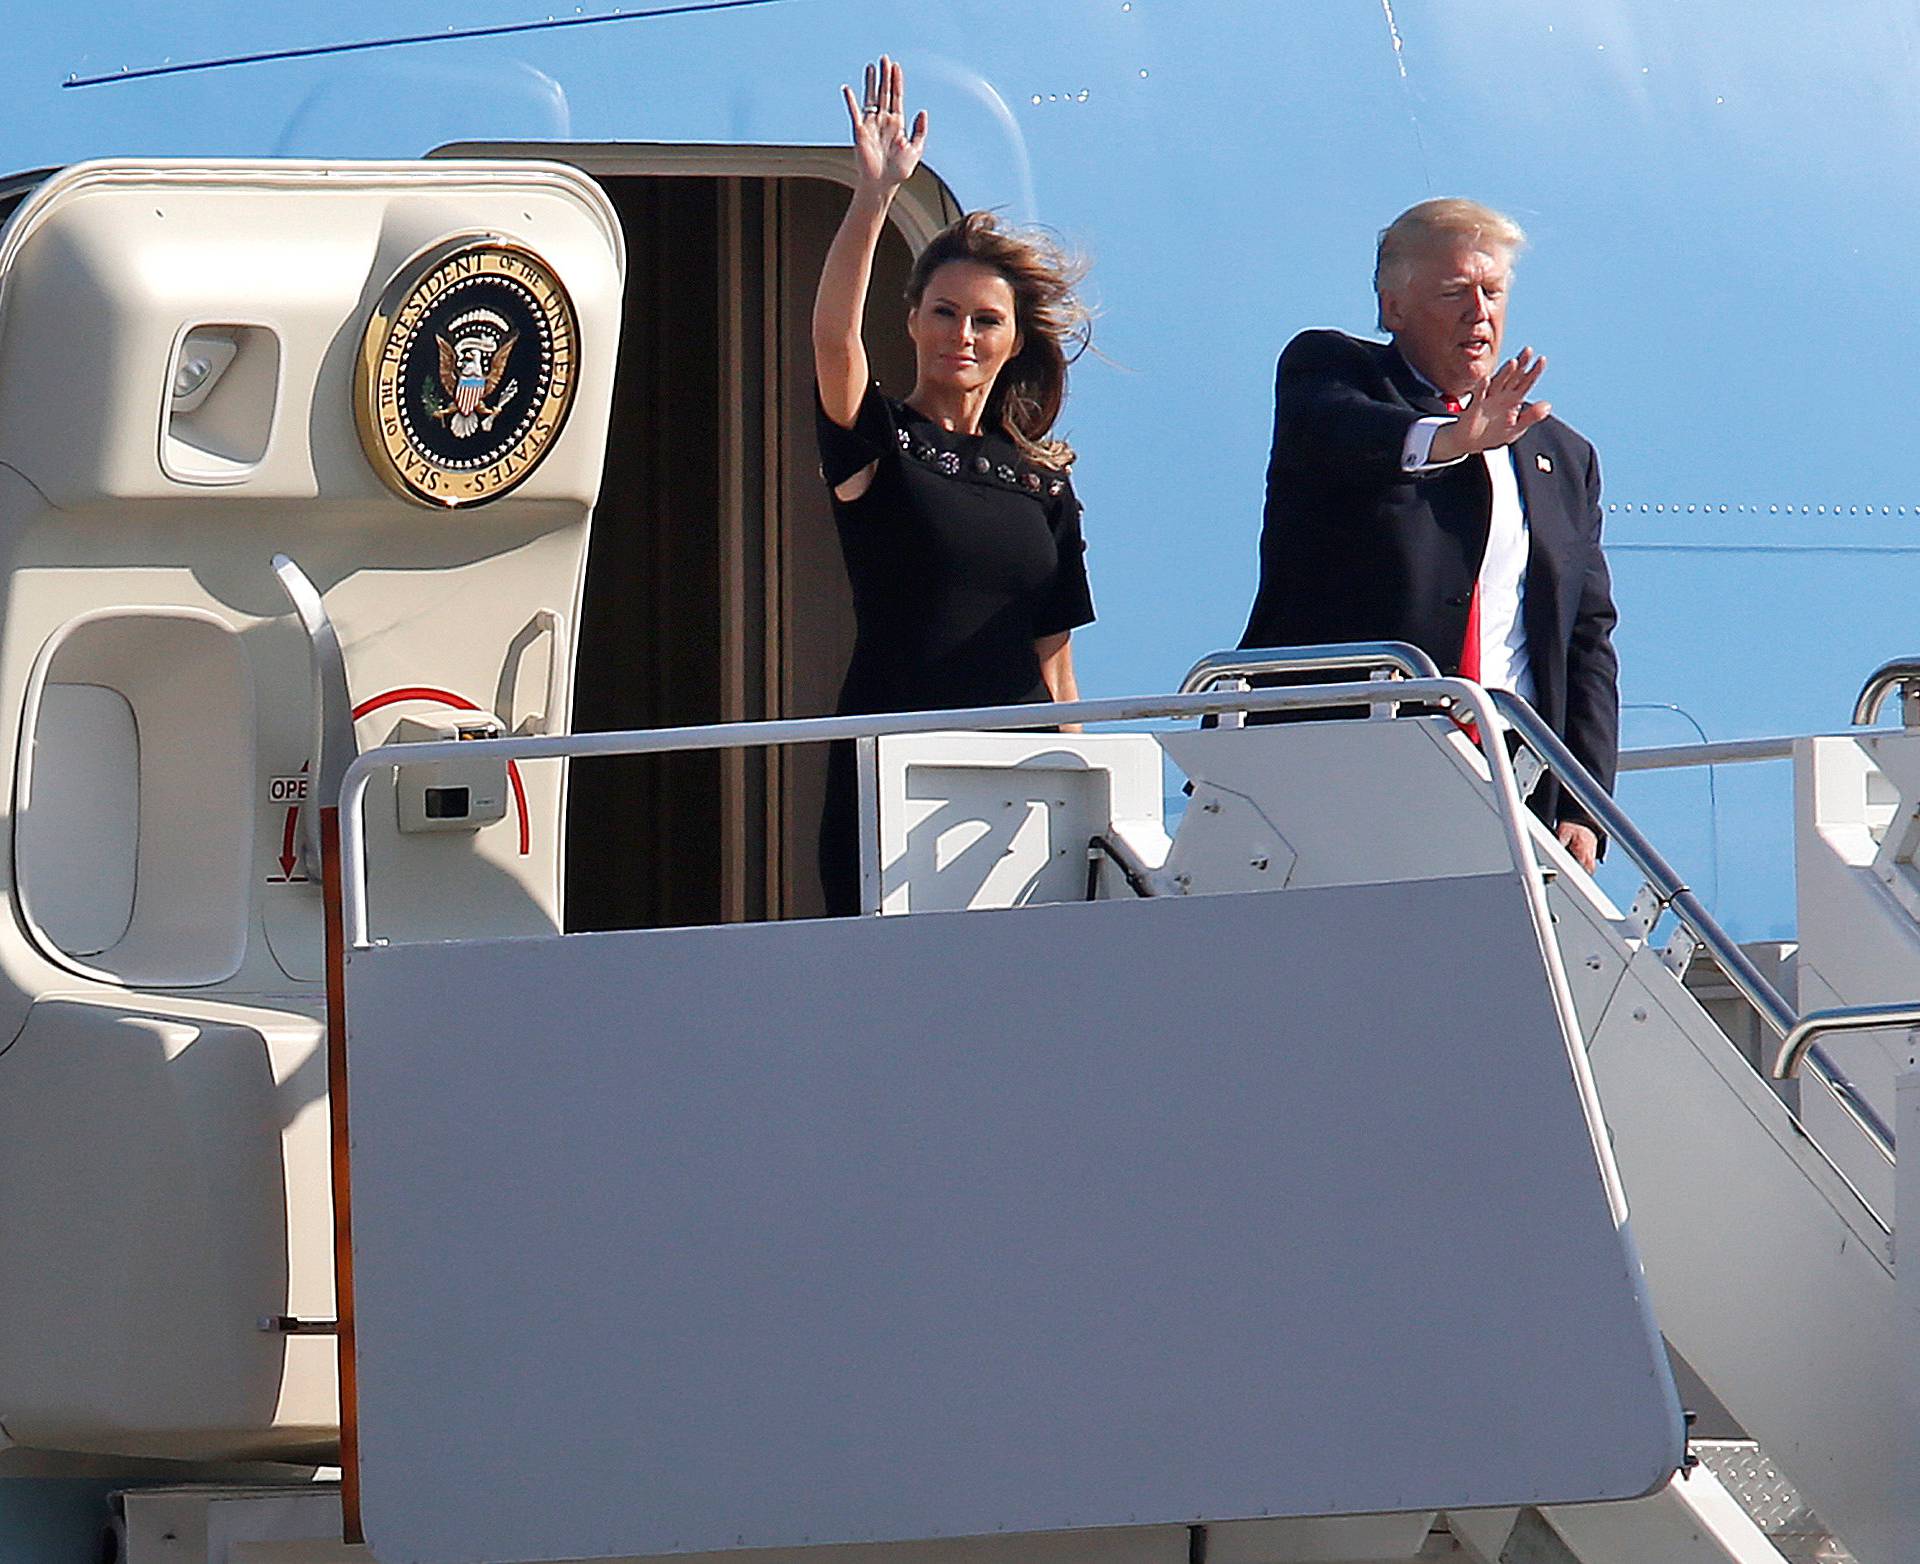 U.S. President Donald Trump and first lady Melania Trump wave outside Air Force One before returning to Washington D.C. at Sigonella Air Force Base in Sigonella, Sicily